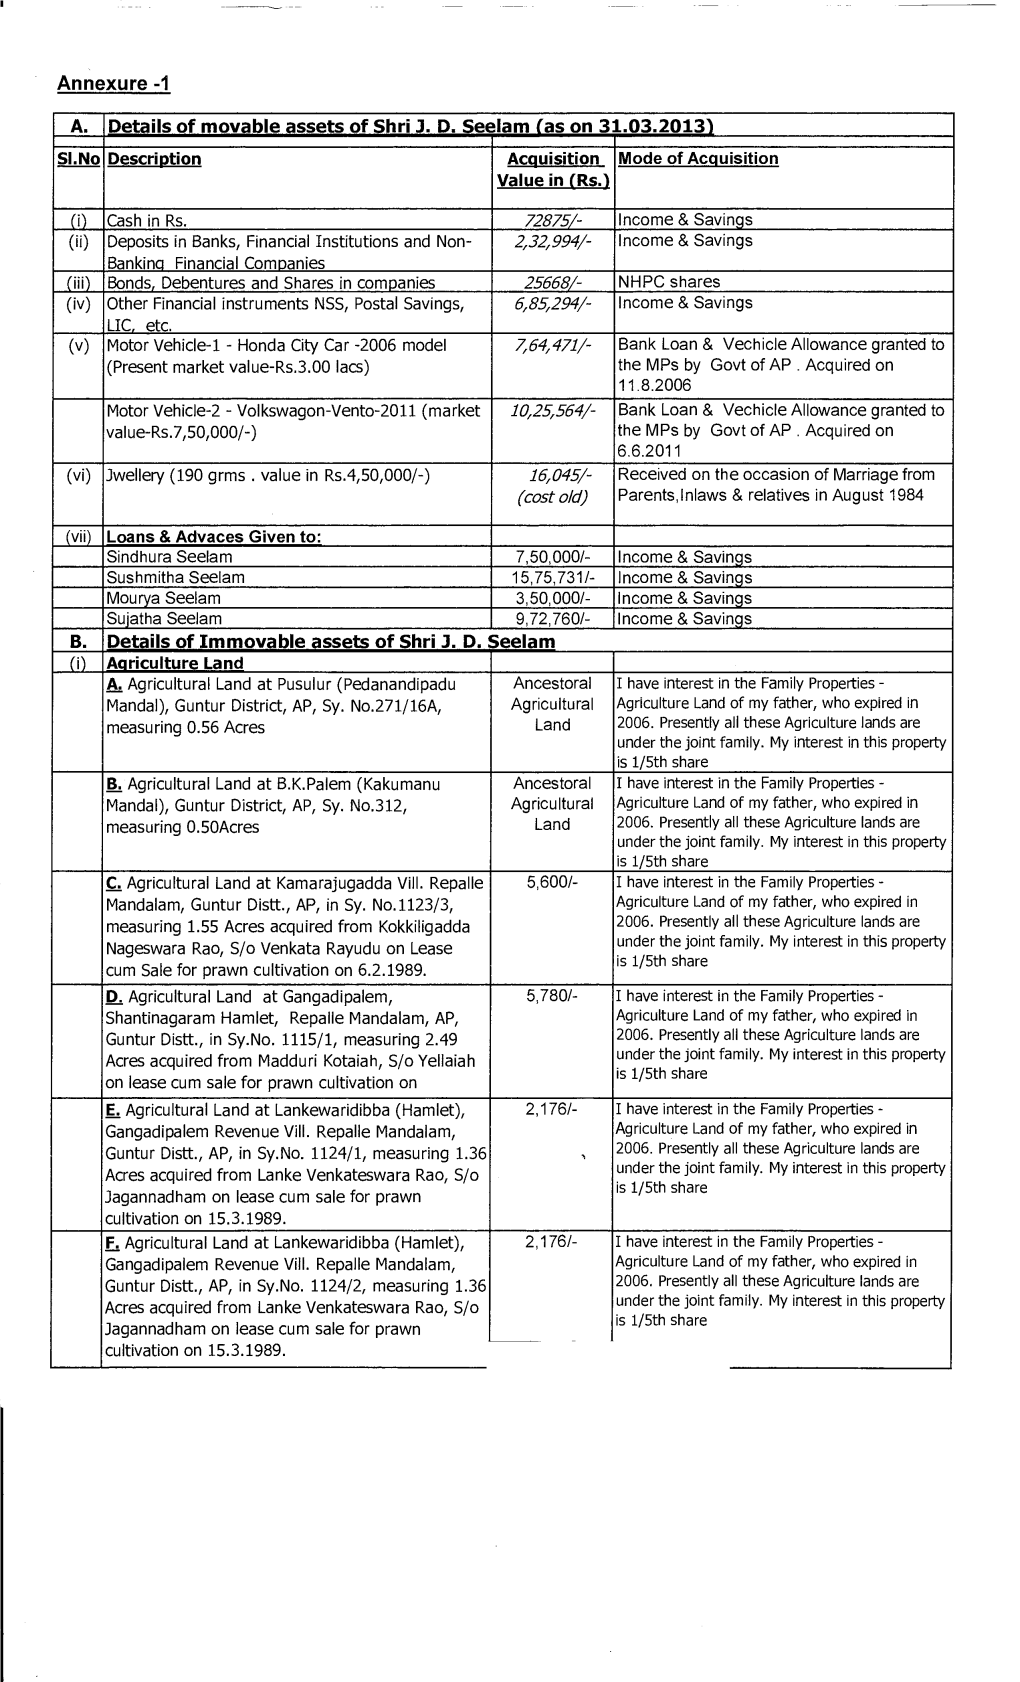 1 A. Details of Movable Assets of Shri JD Seelam (As on 31.03.2013)